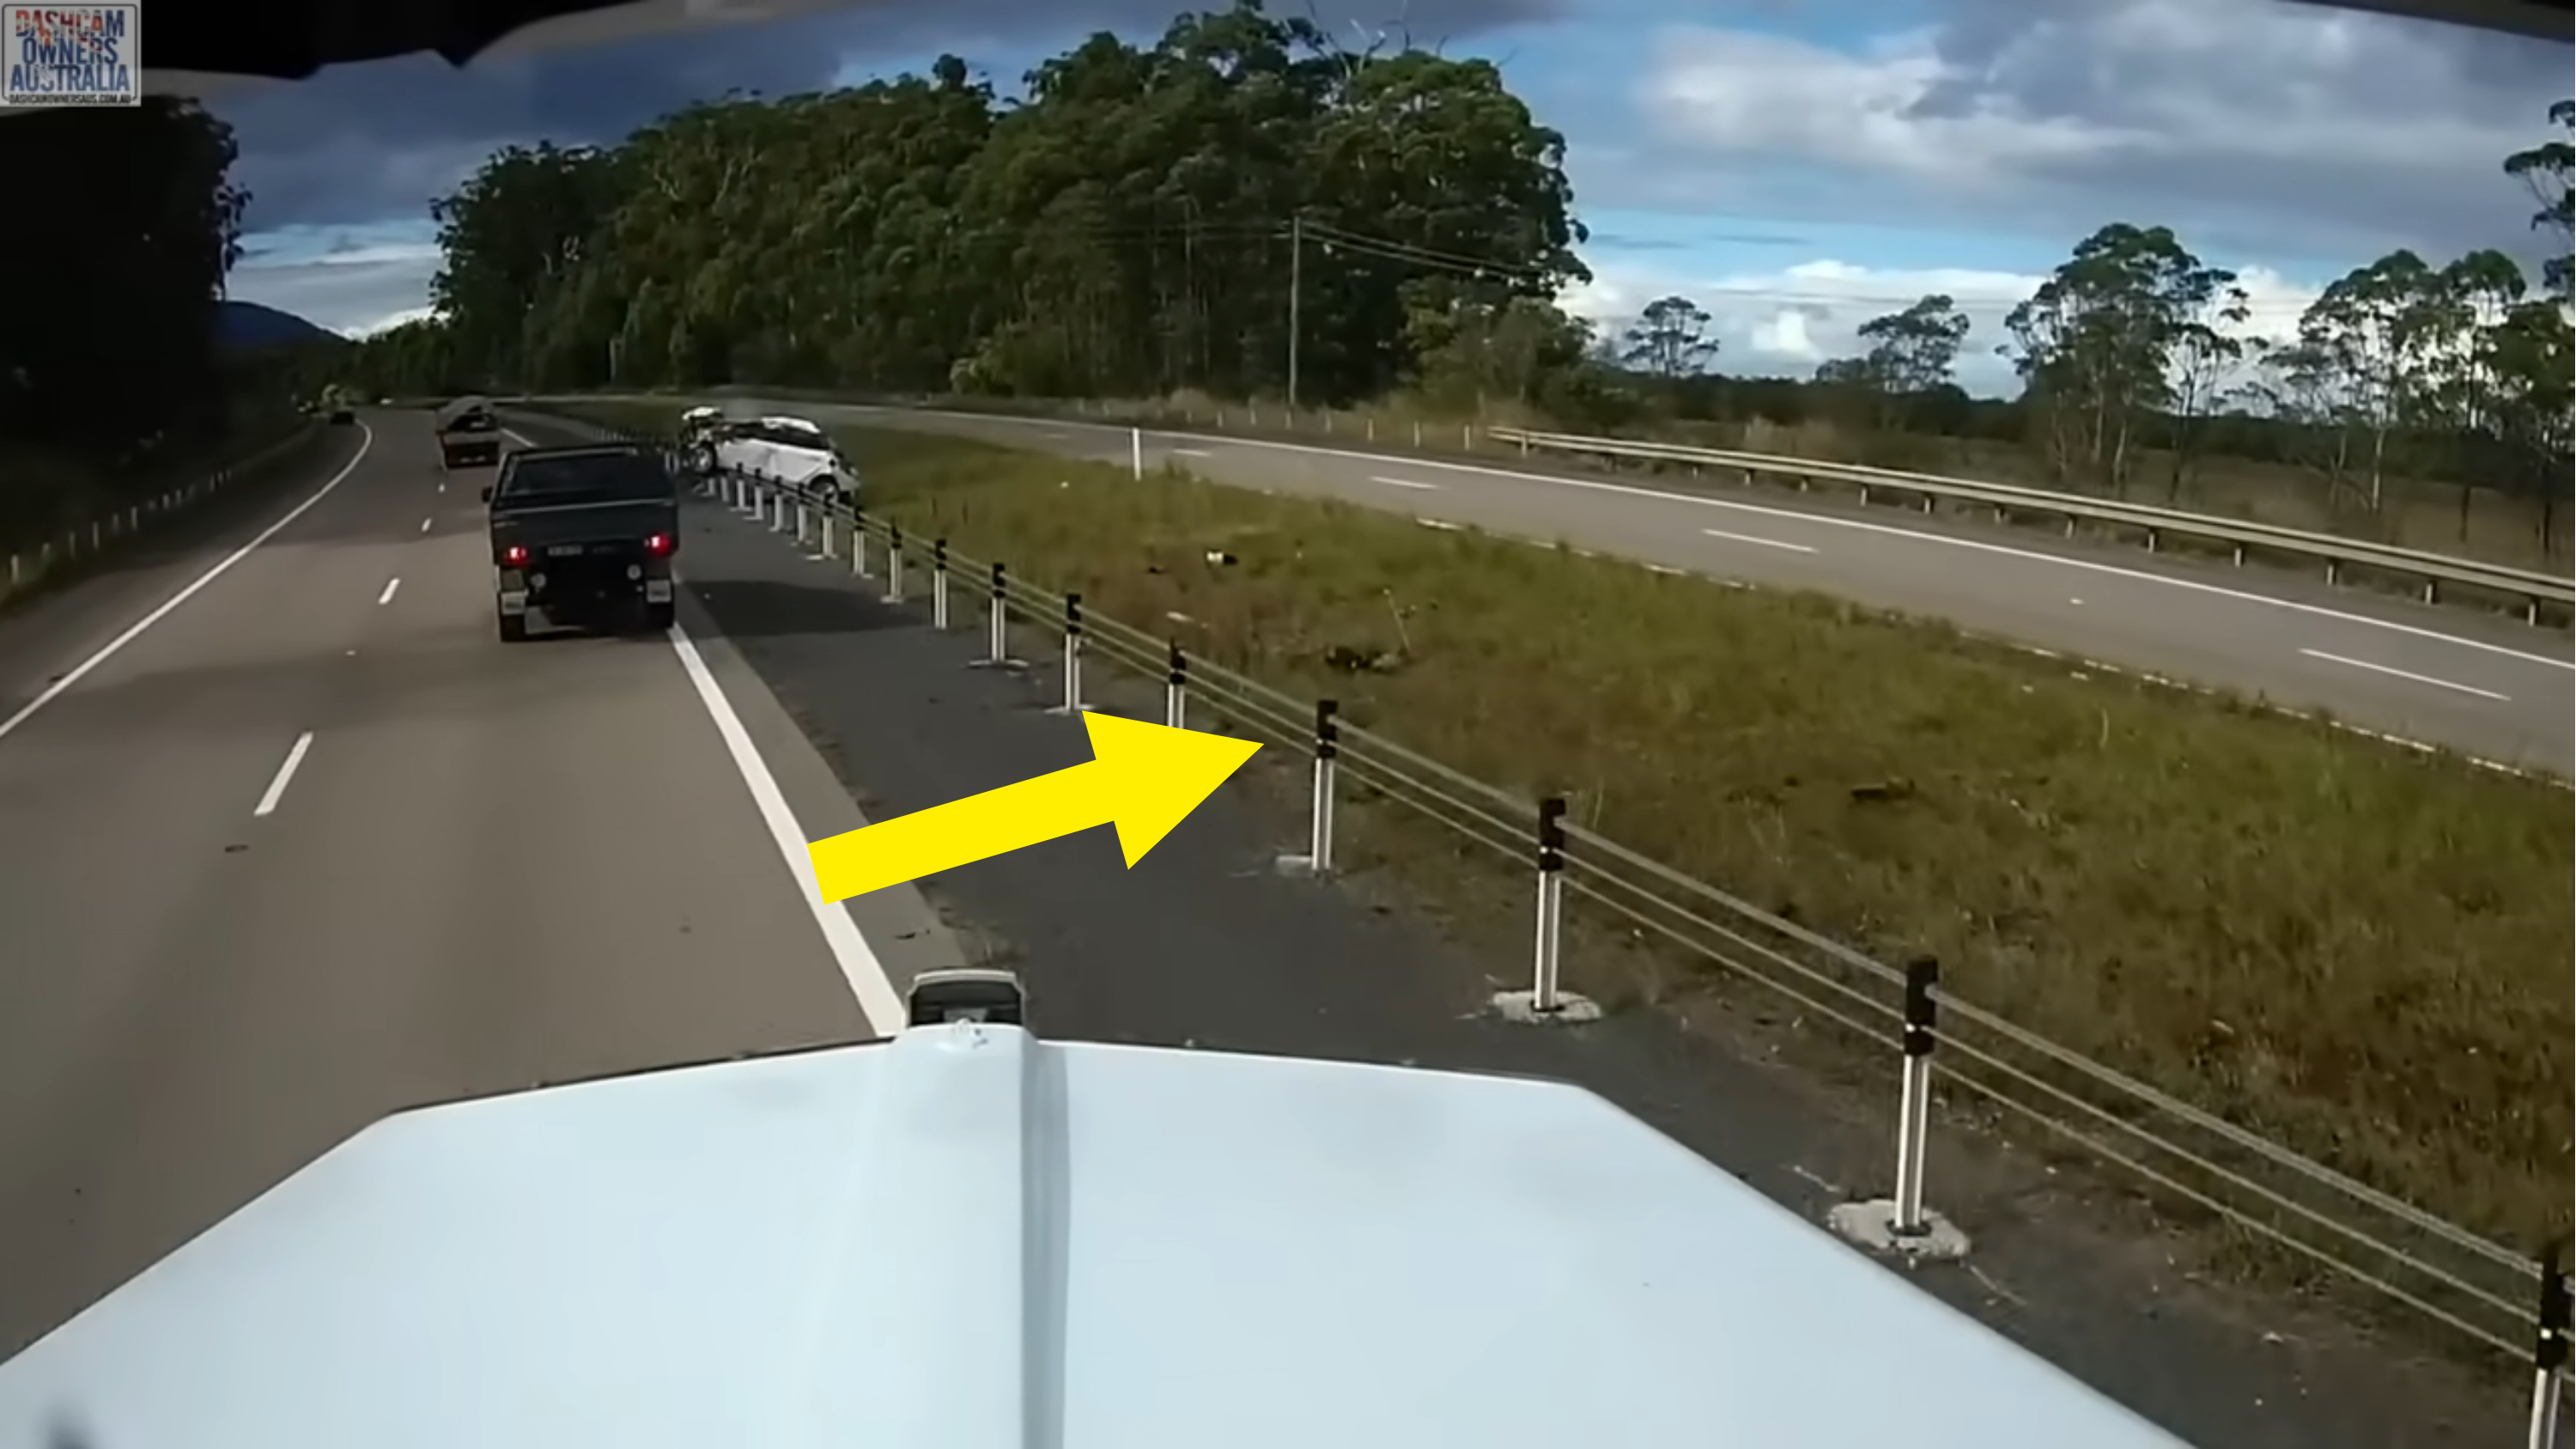 Dashcam view from vehicle showing another car passing by on a highway with guardrails and grassy verge